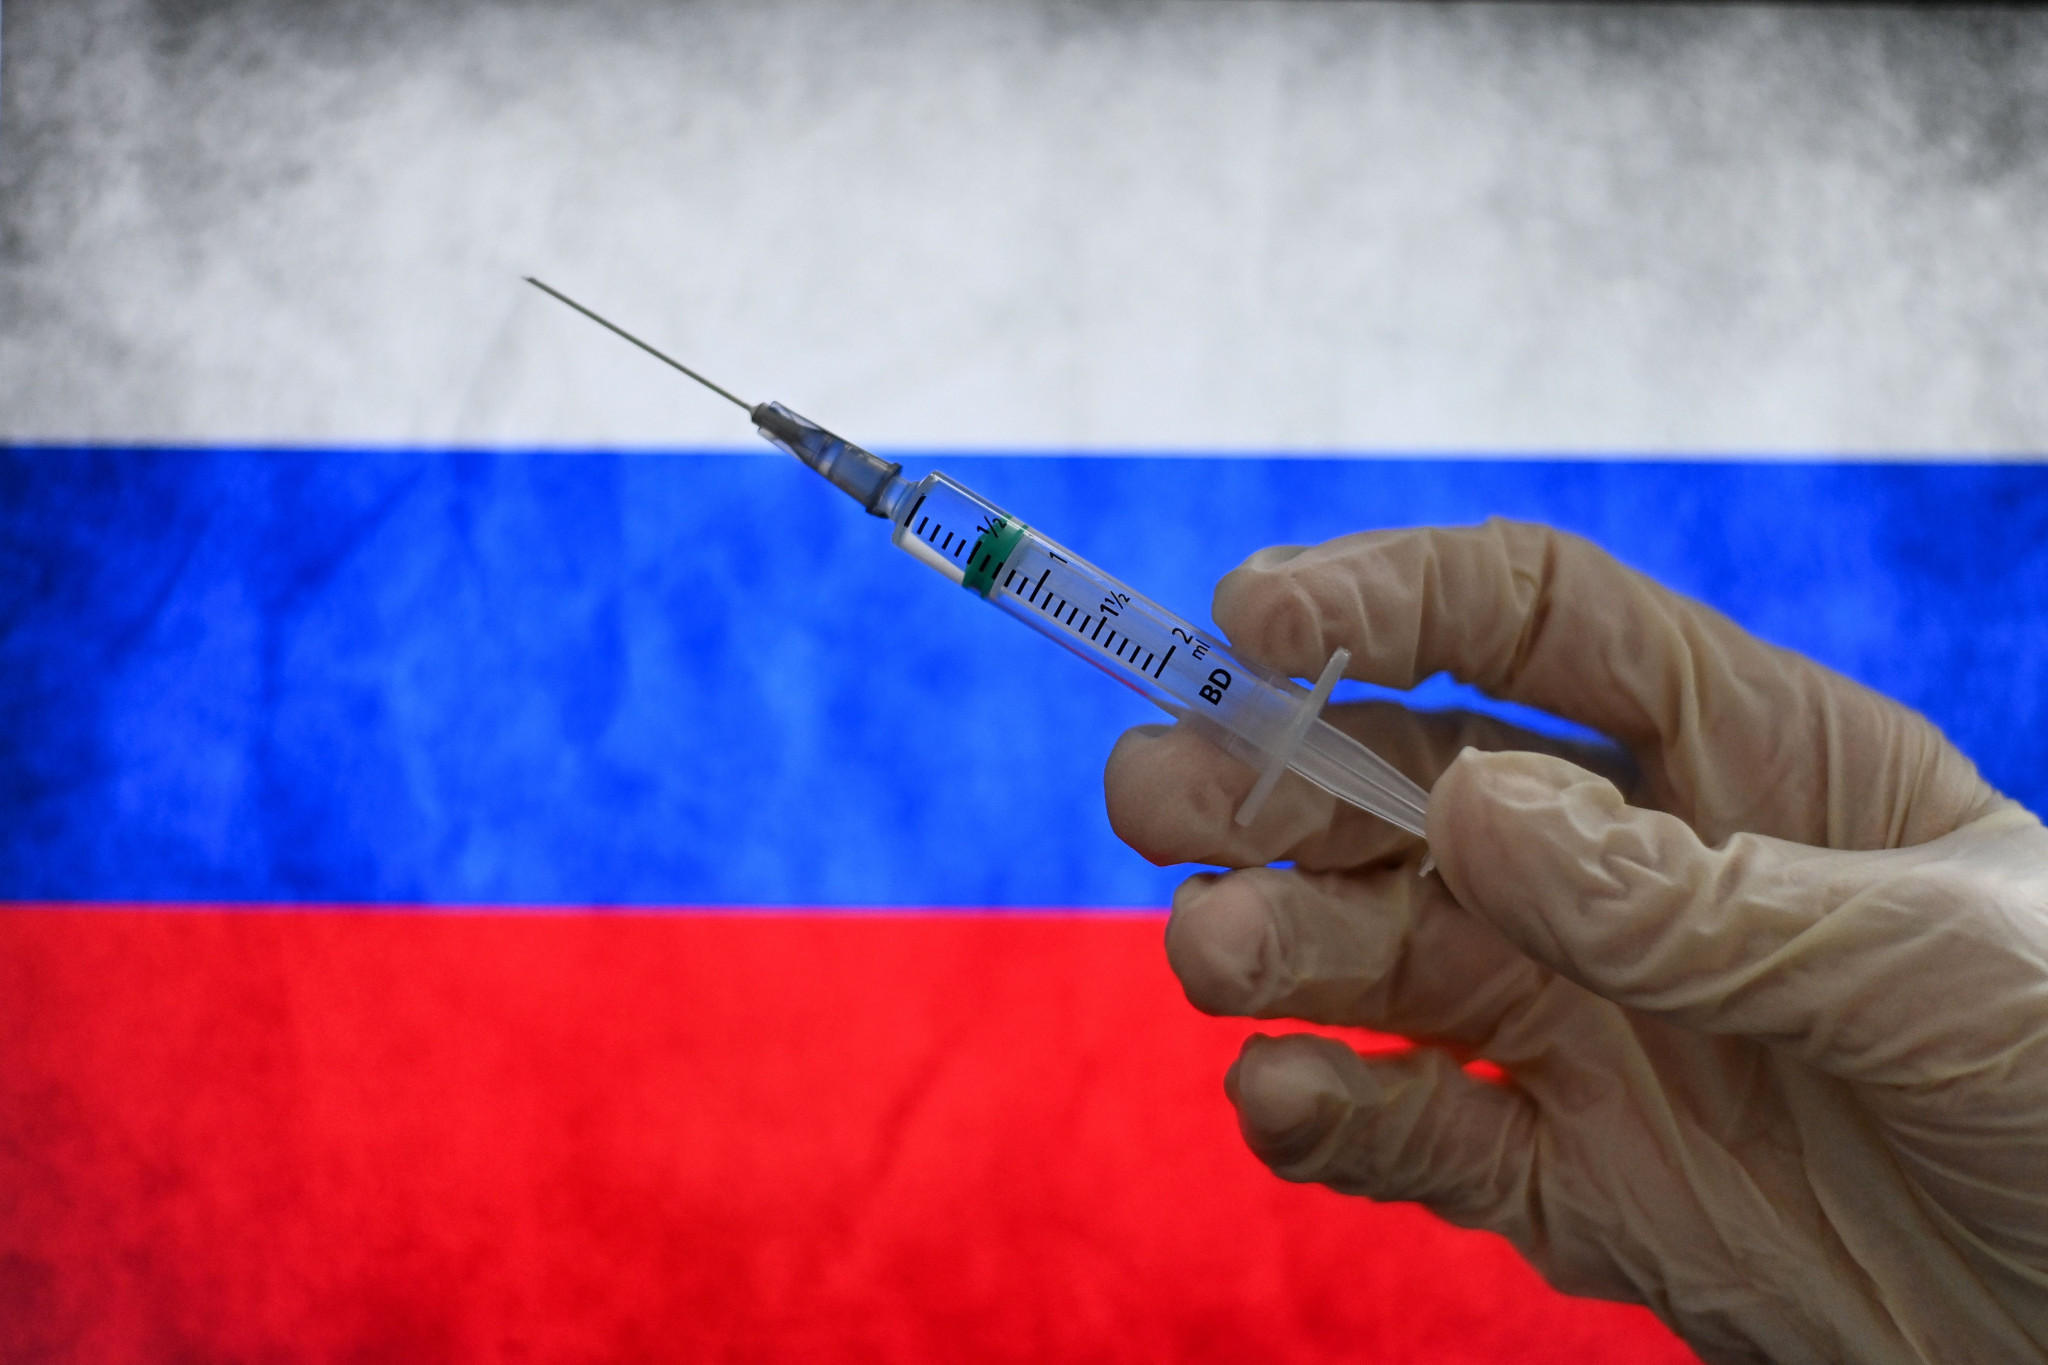 Russia's flag has been banned from world sport due to the country's doping past ©Getty Images